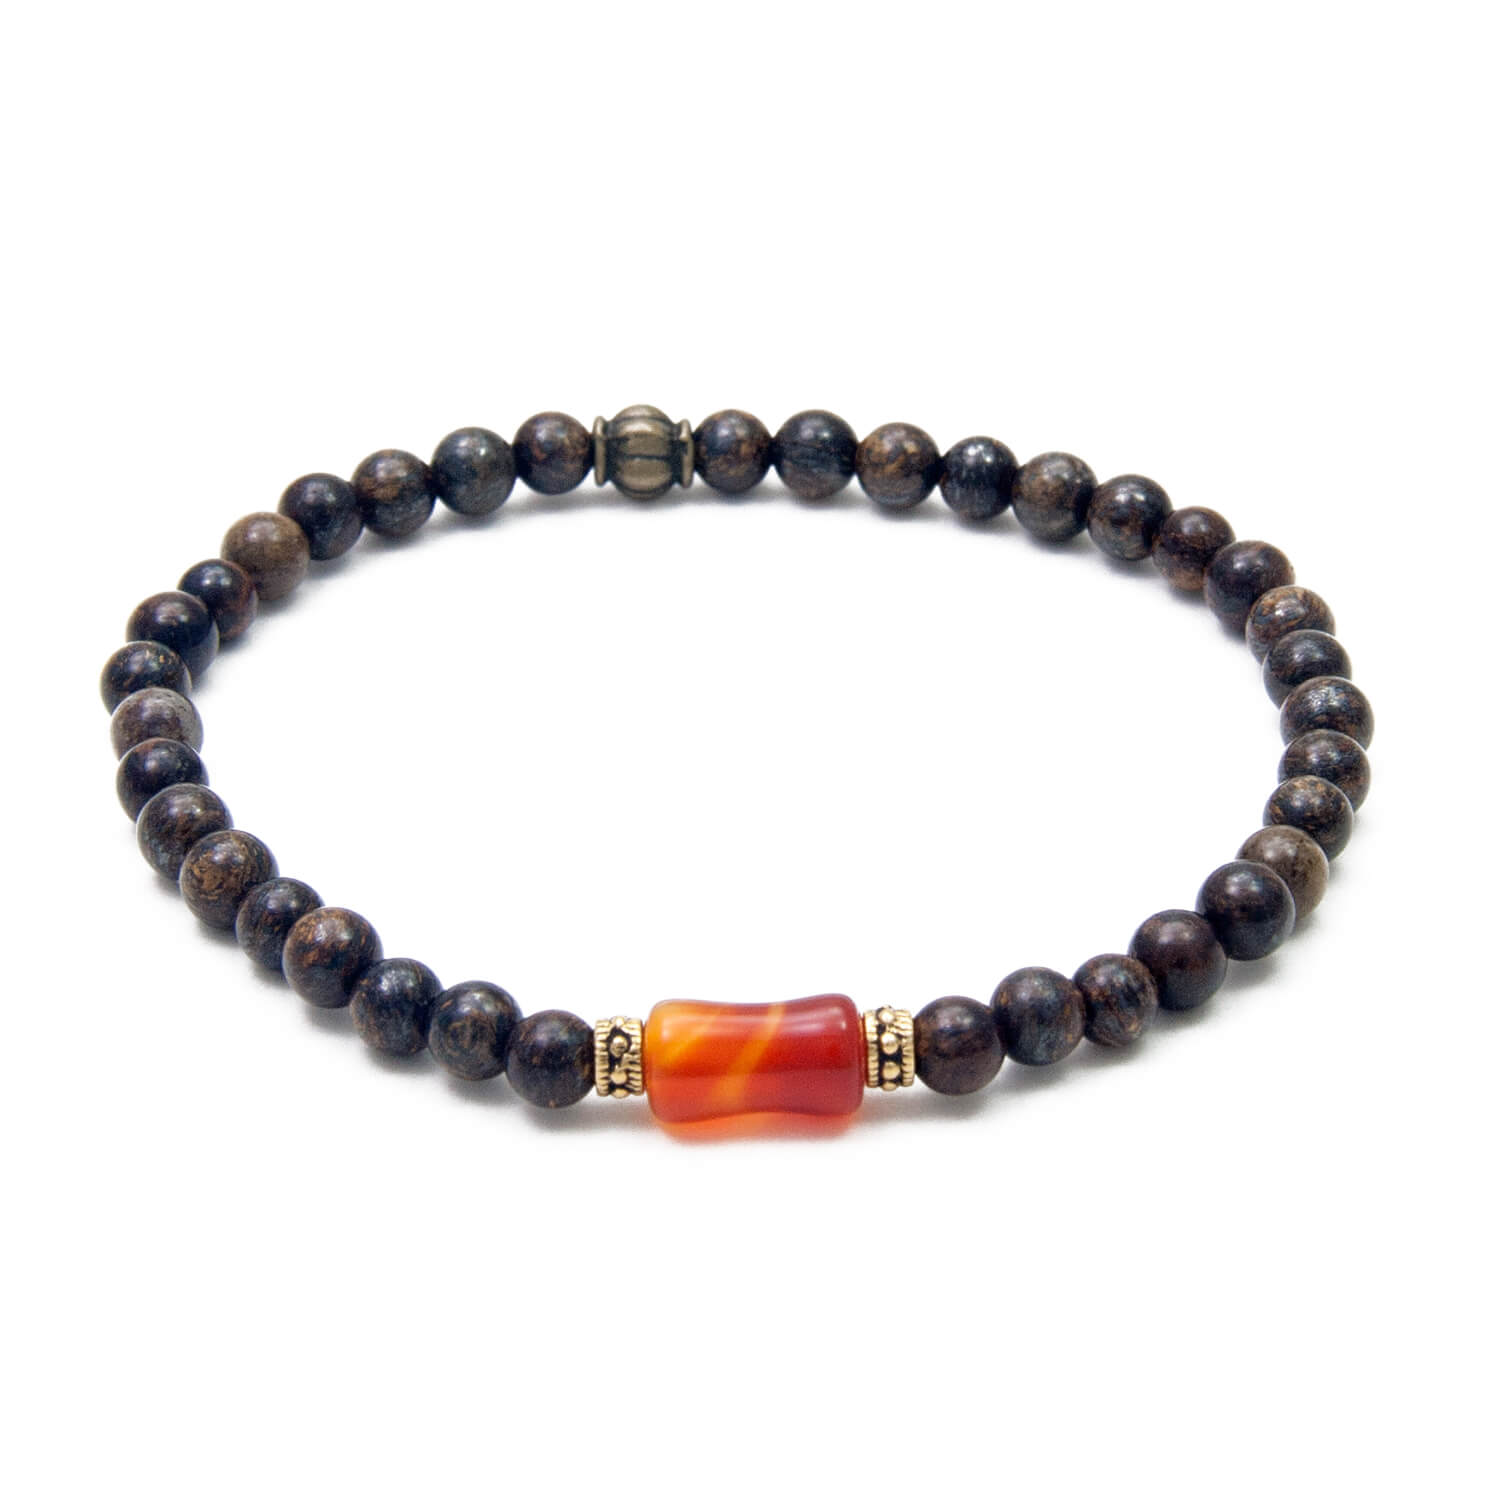 Natural Gemstone Bracelets and Their Meanings | All Crystal